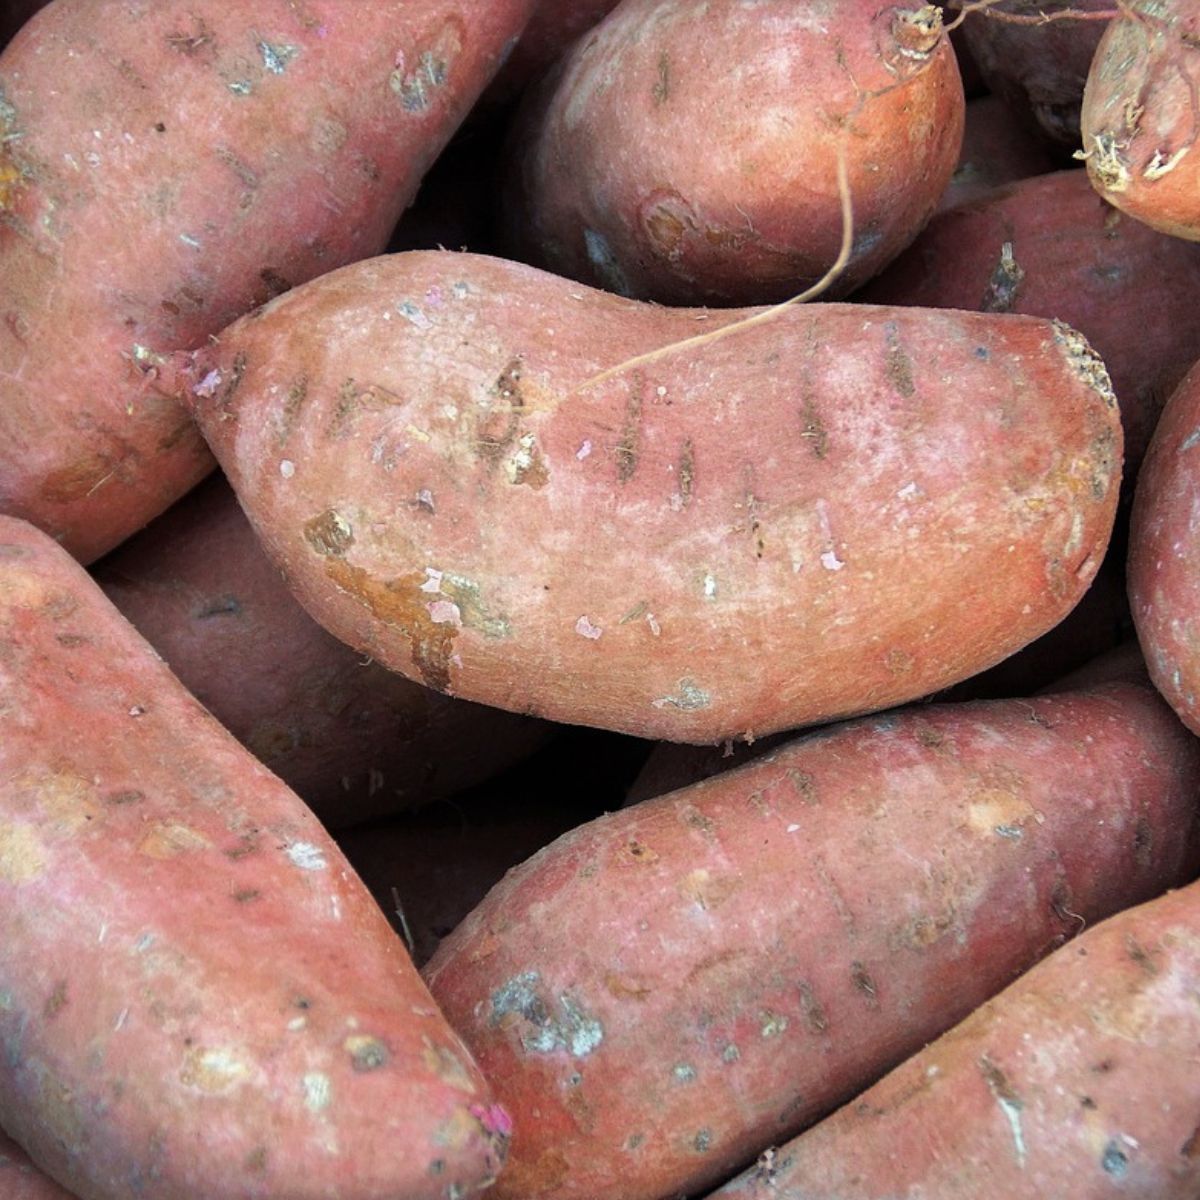 Sweet potatoes for dogs